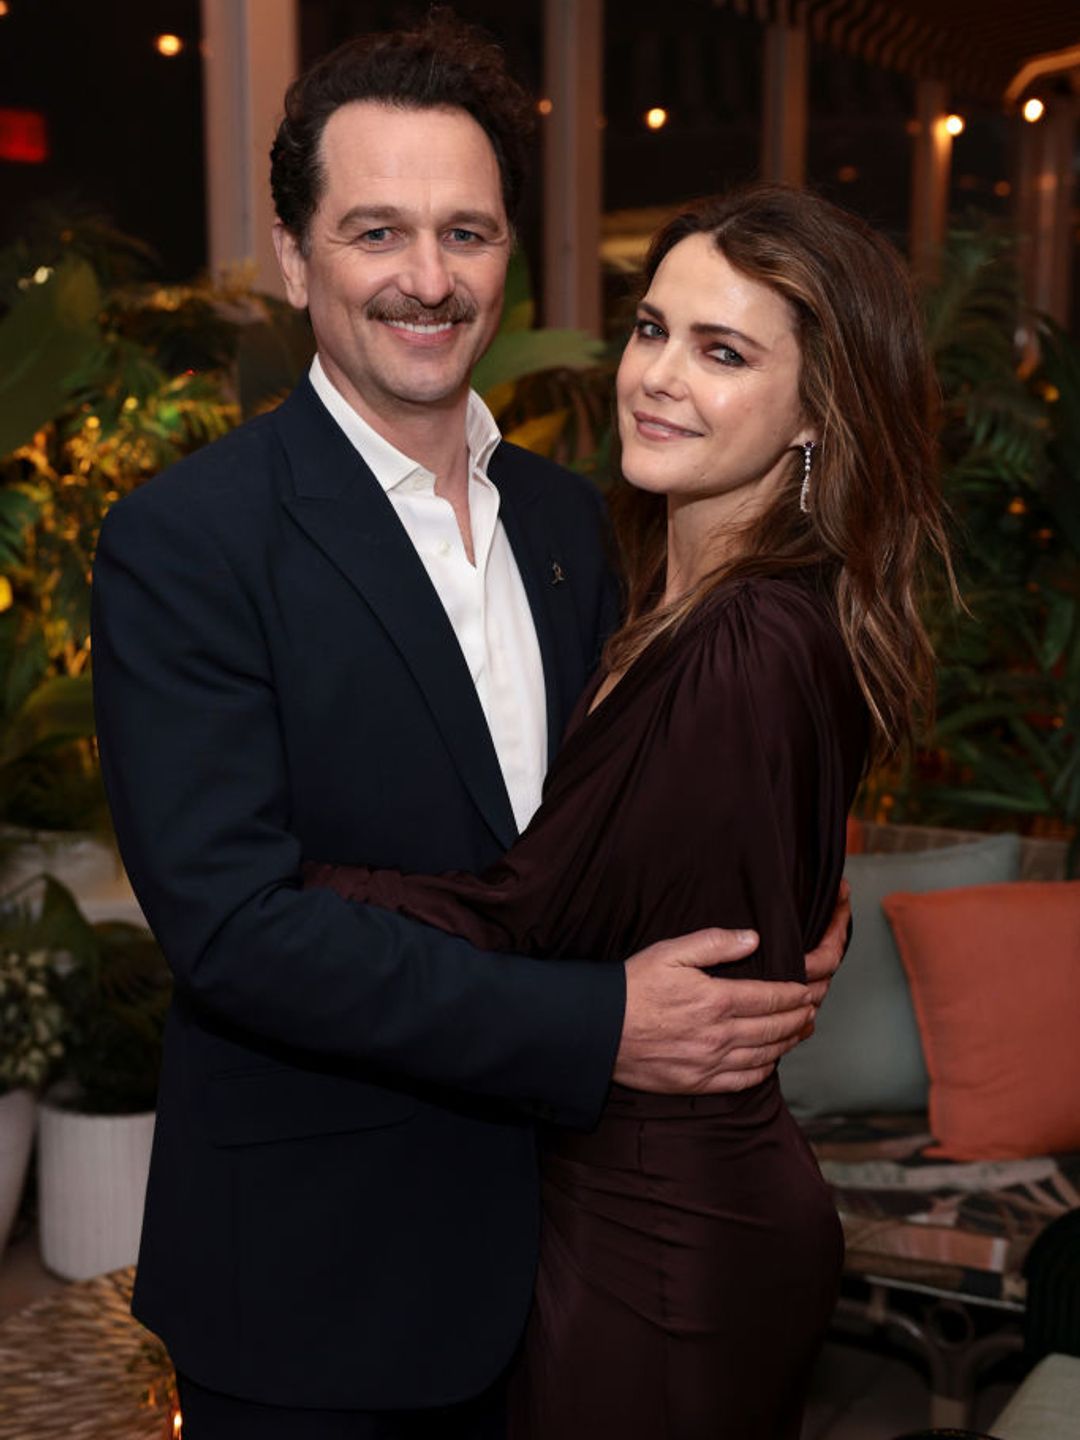 Matthew and Keri at the New York premiere after party for The Diplomat